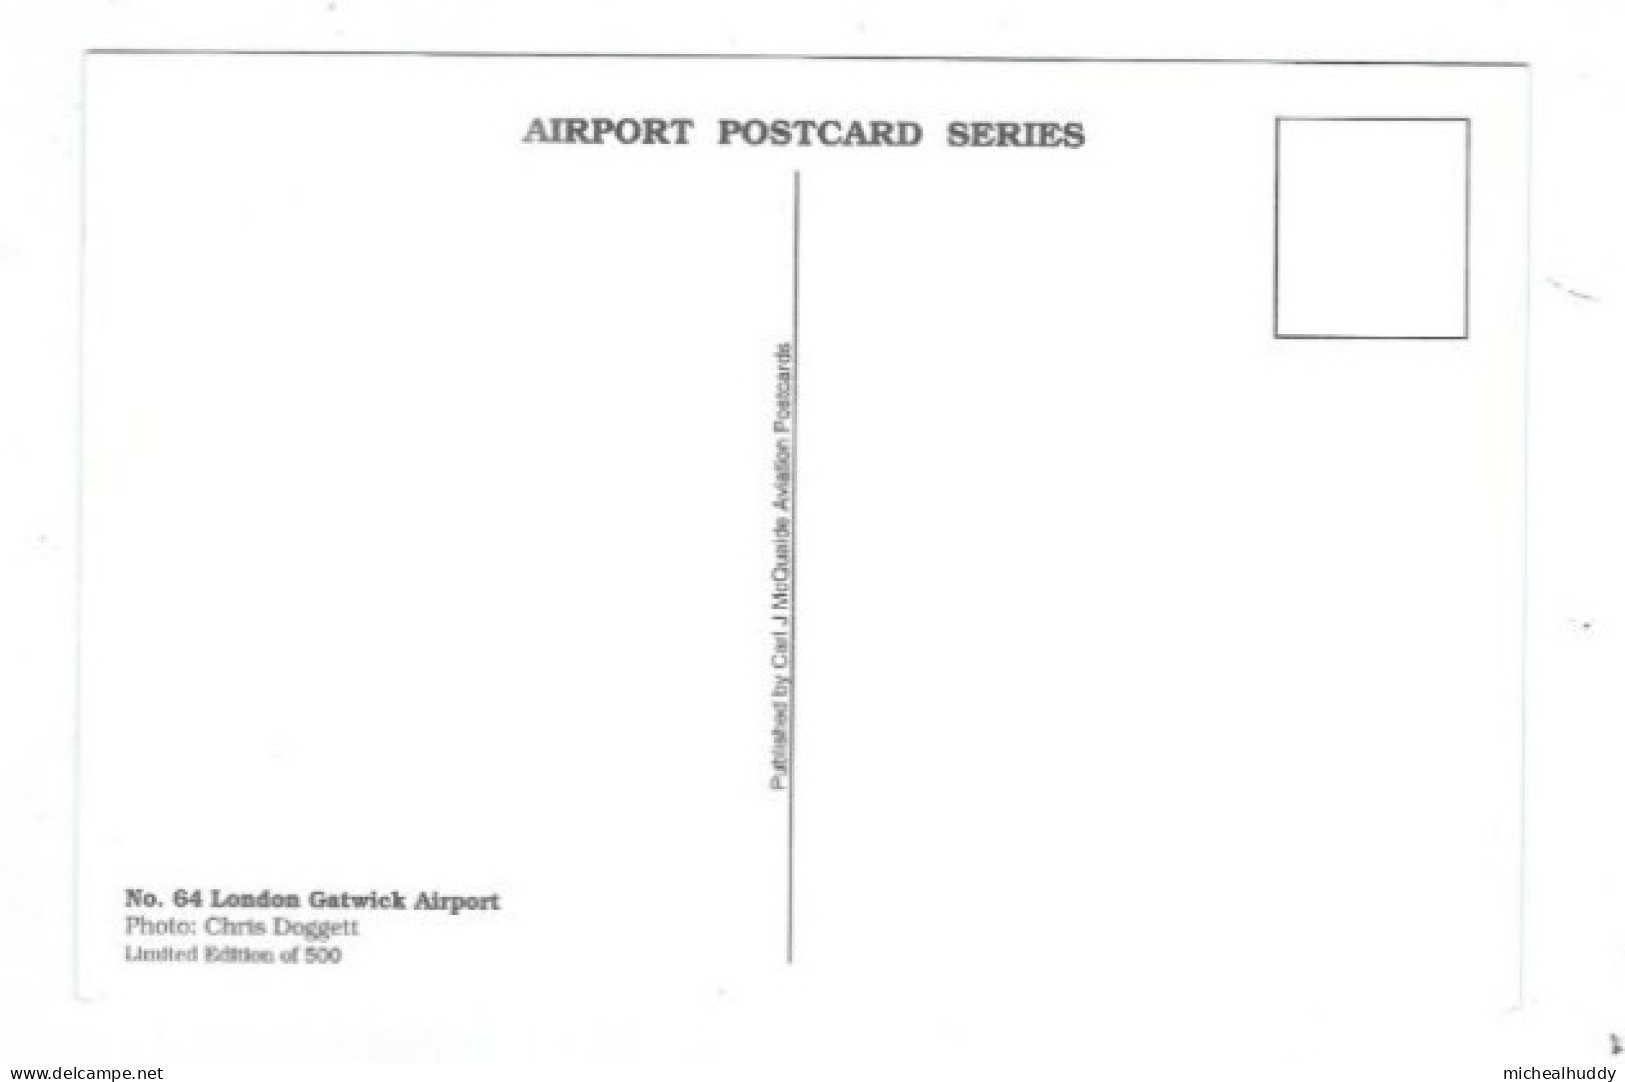 POSTCARD   PUBL BY  BY C MCQUAIDE IN HIS AIRPORT SERRIES  LONDON GATWICK  CARD N0 64 - Aerodromi